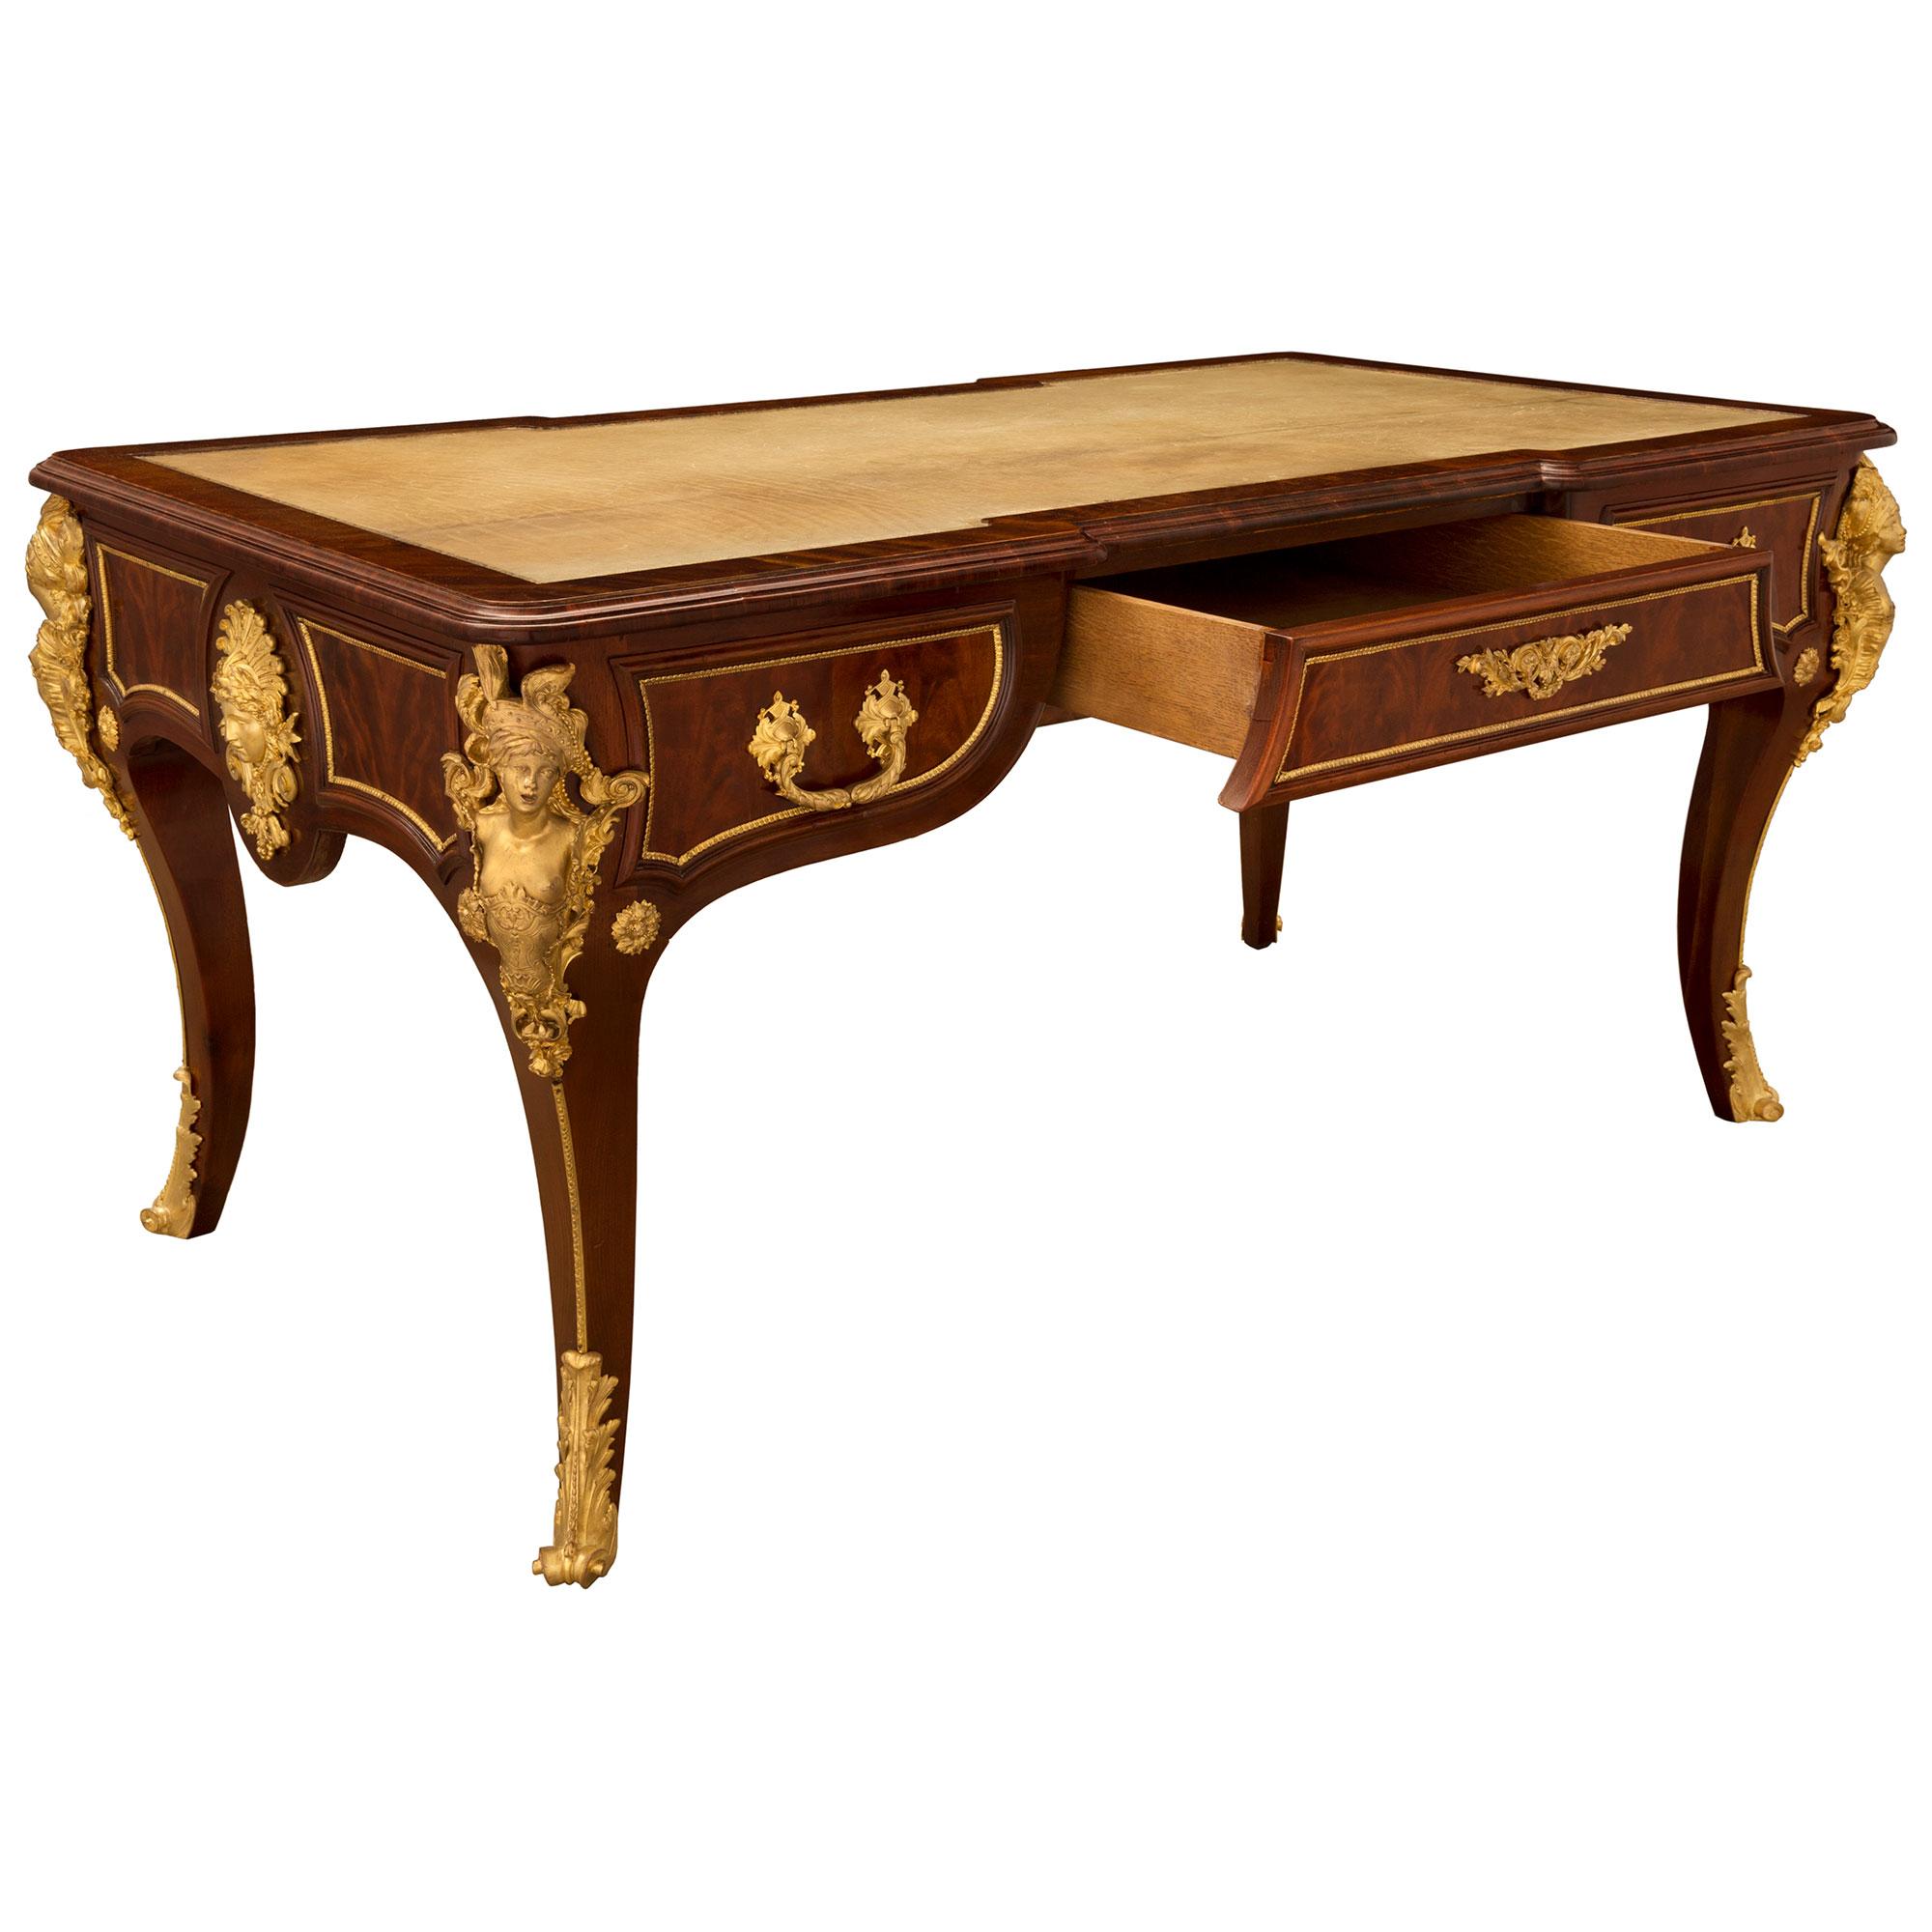 French 19th Century Louis XV Style Flamed Mahogany and Ormolu Bureau Plat Desk For Sale 1